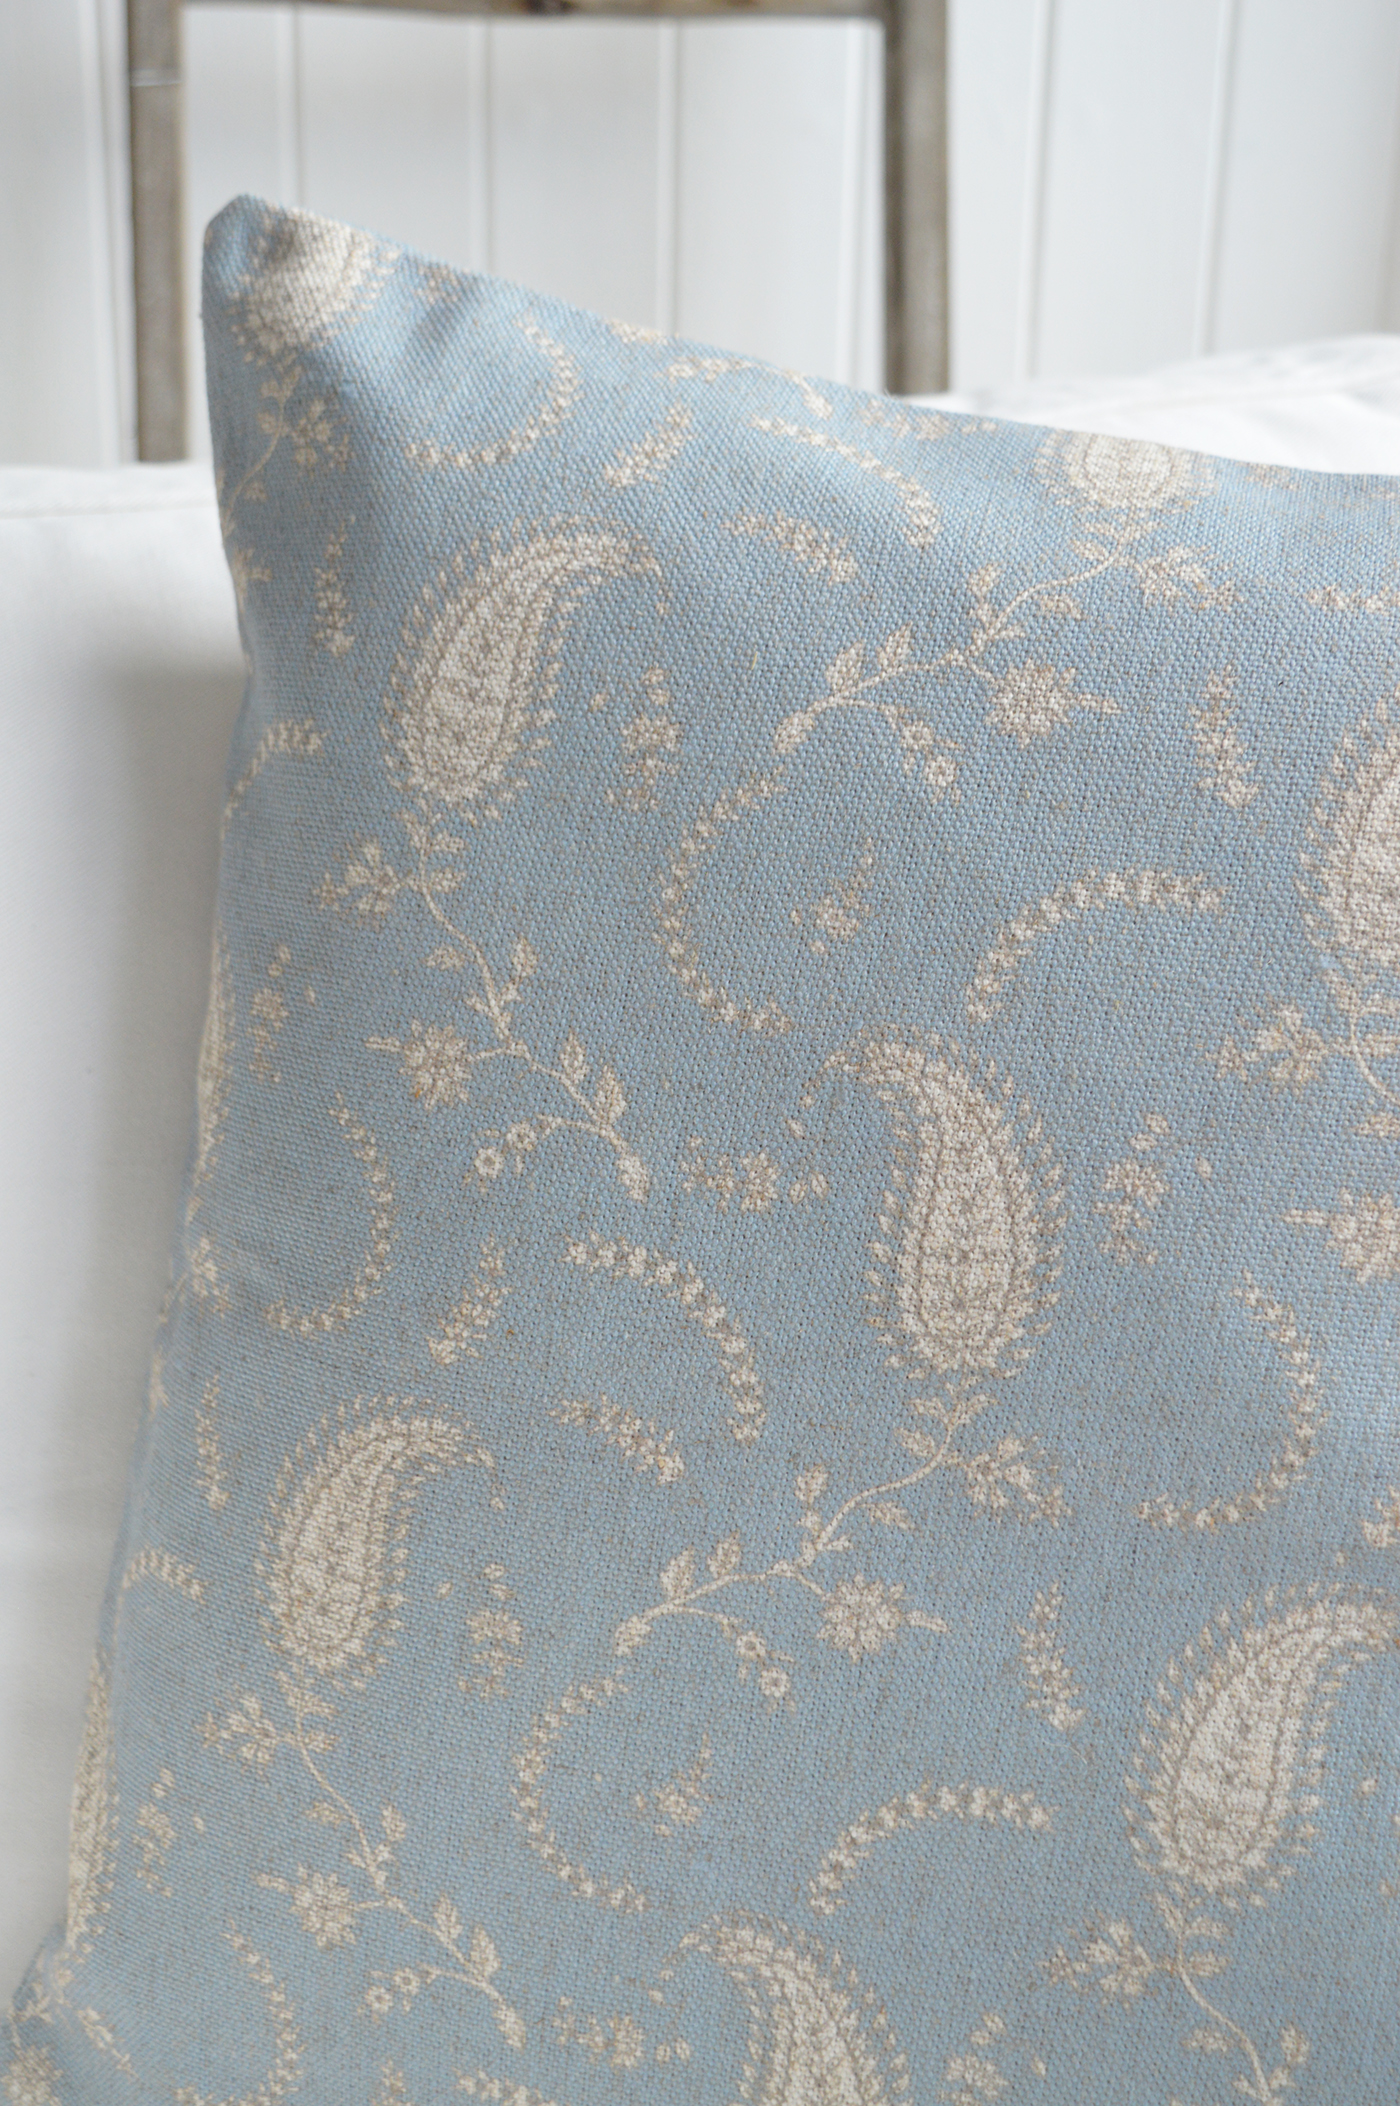 New England luxurious cushions for coastal and modern farmhouse homes and interiors